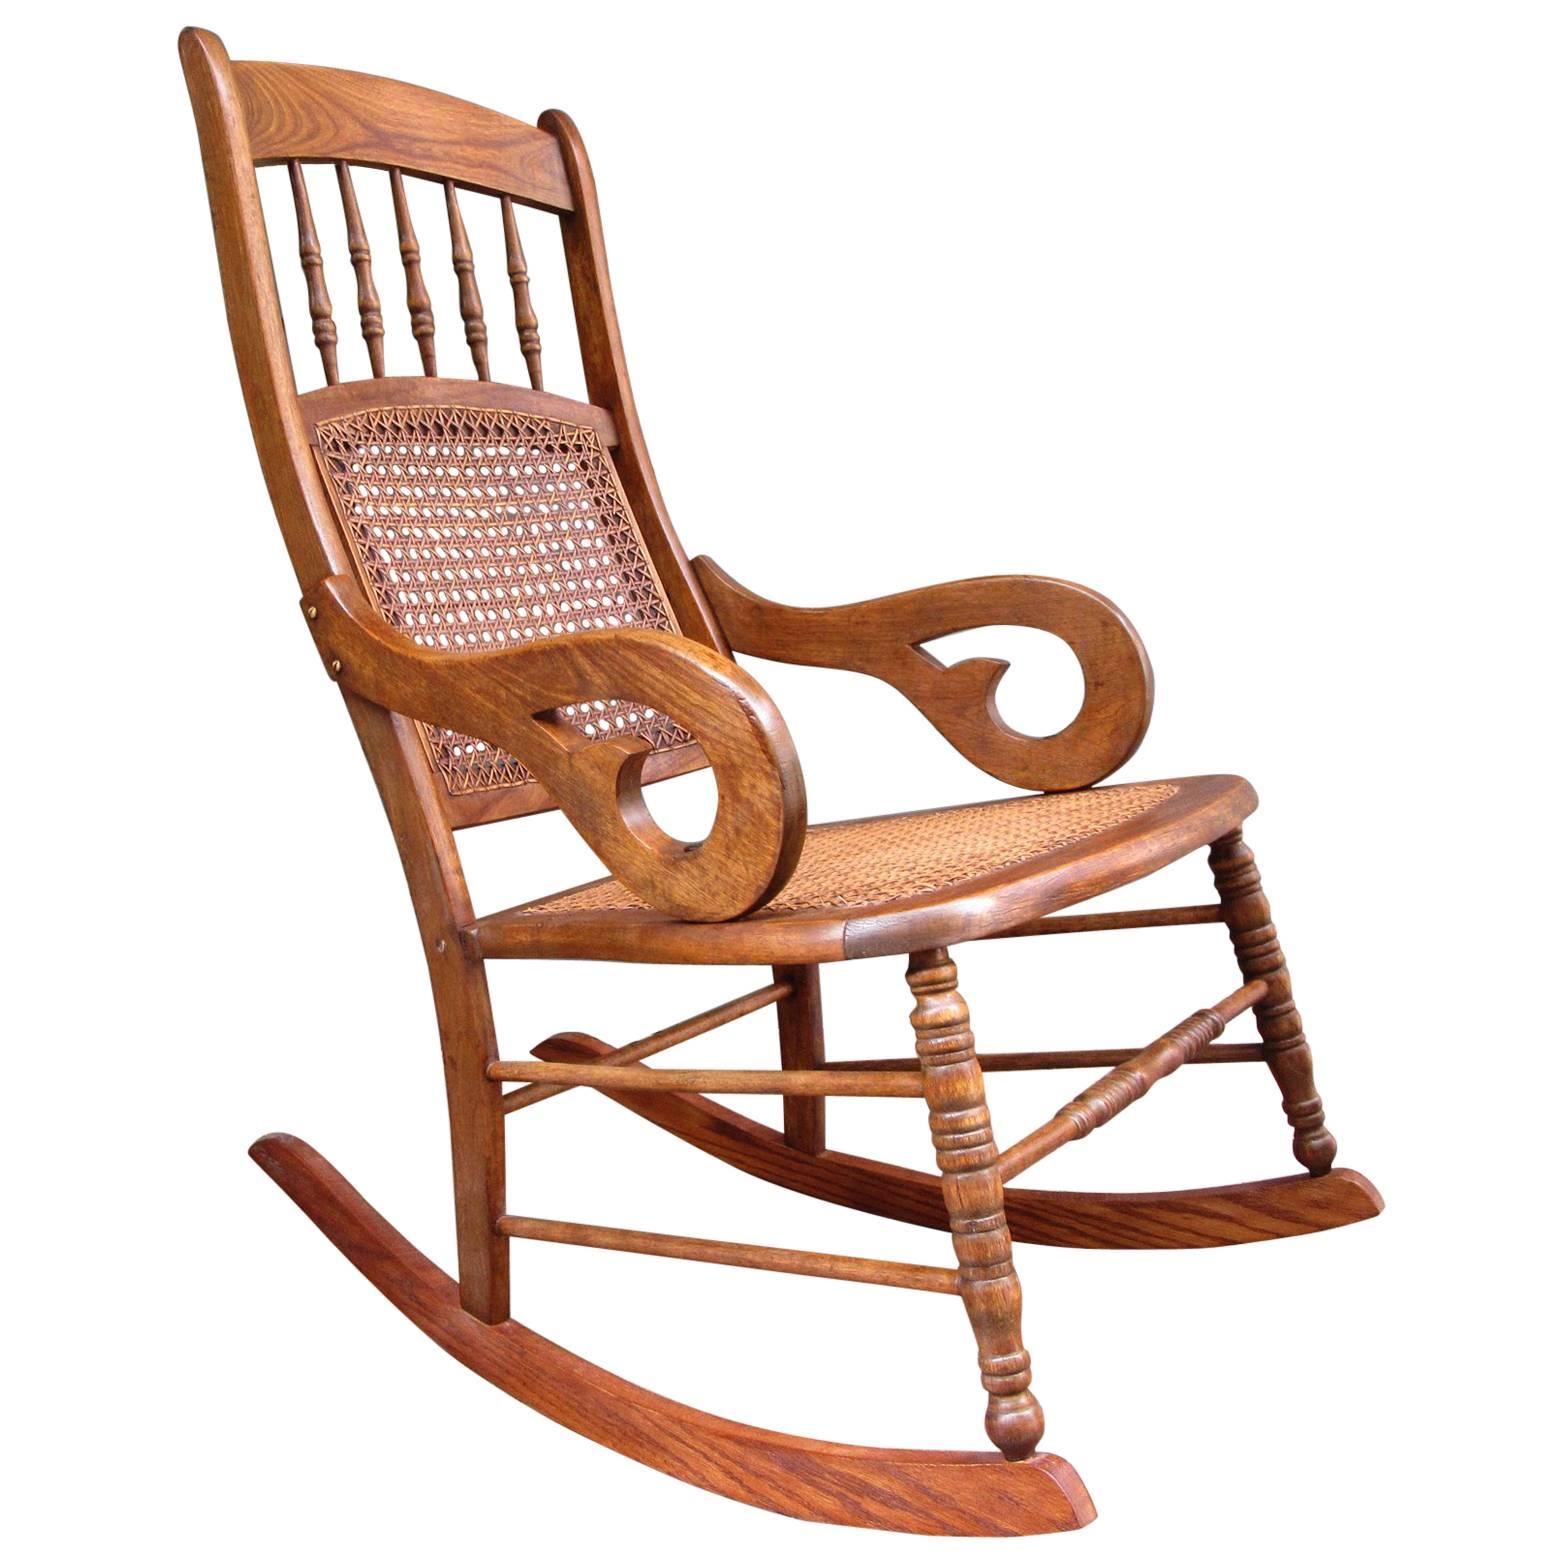 Mid-19th Century St. Croix Regency Mahogany and Cane Rocking Chair For Sale